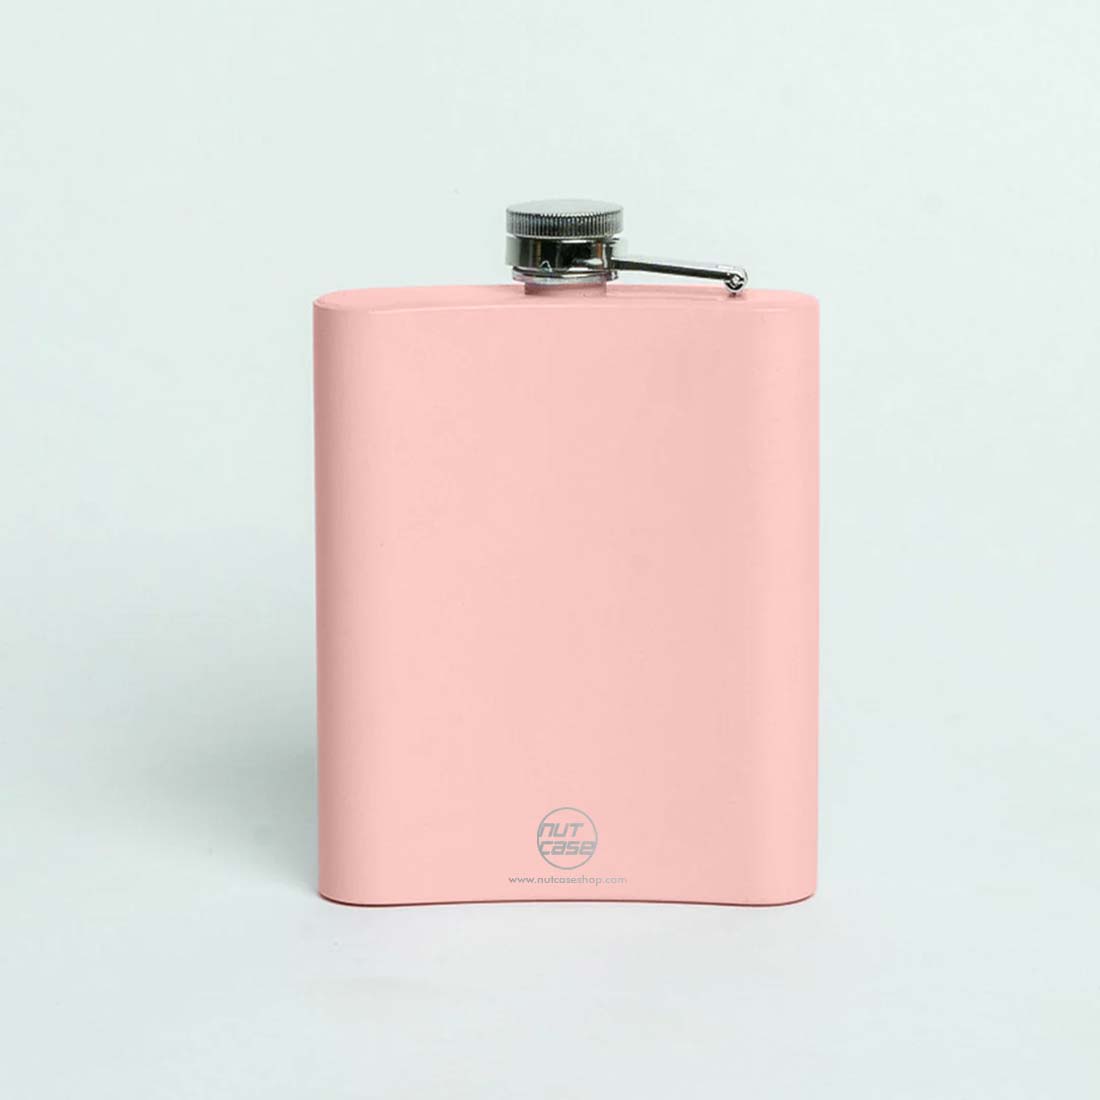 Custom Bride Hip Flask with Name Date Pink Stainless Steel 8OZ Alcohol Flask